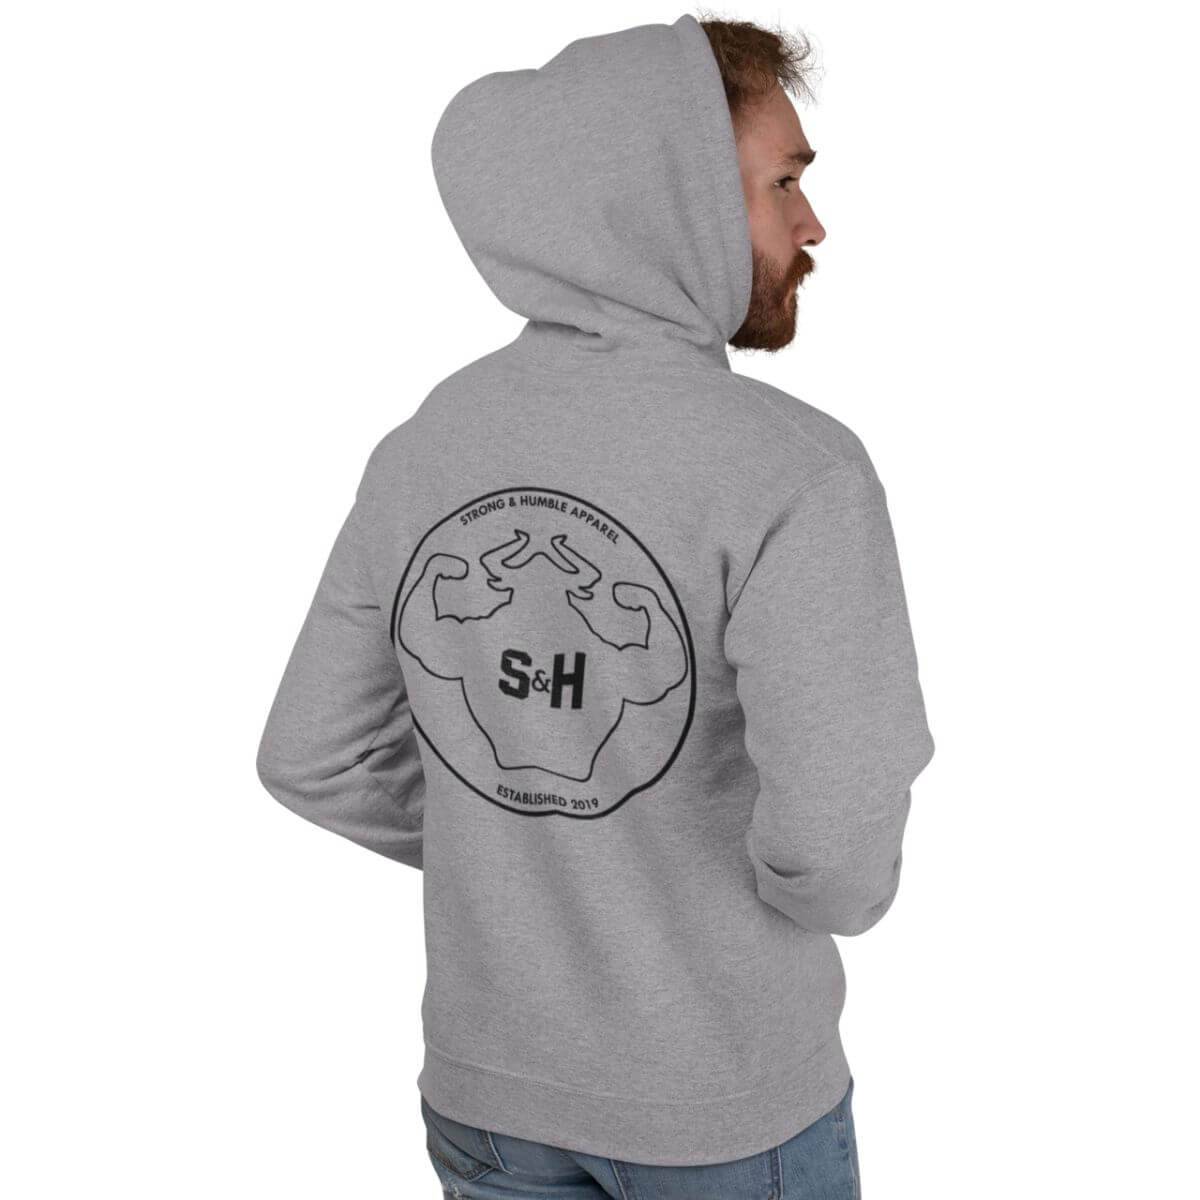 The Outline Men's Hoodie Hoodie - Strong and Humble Apparel